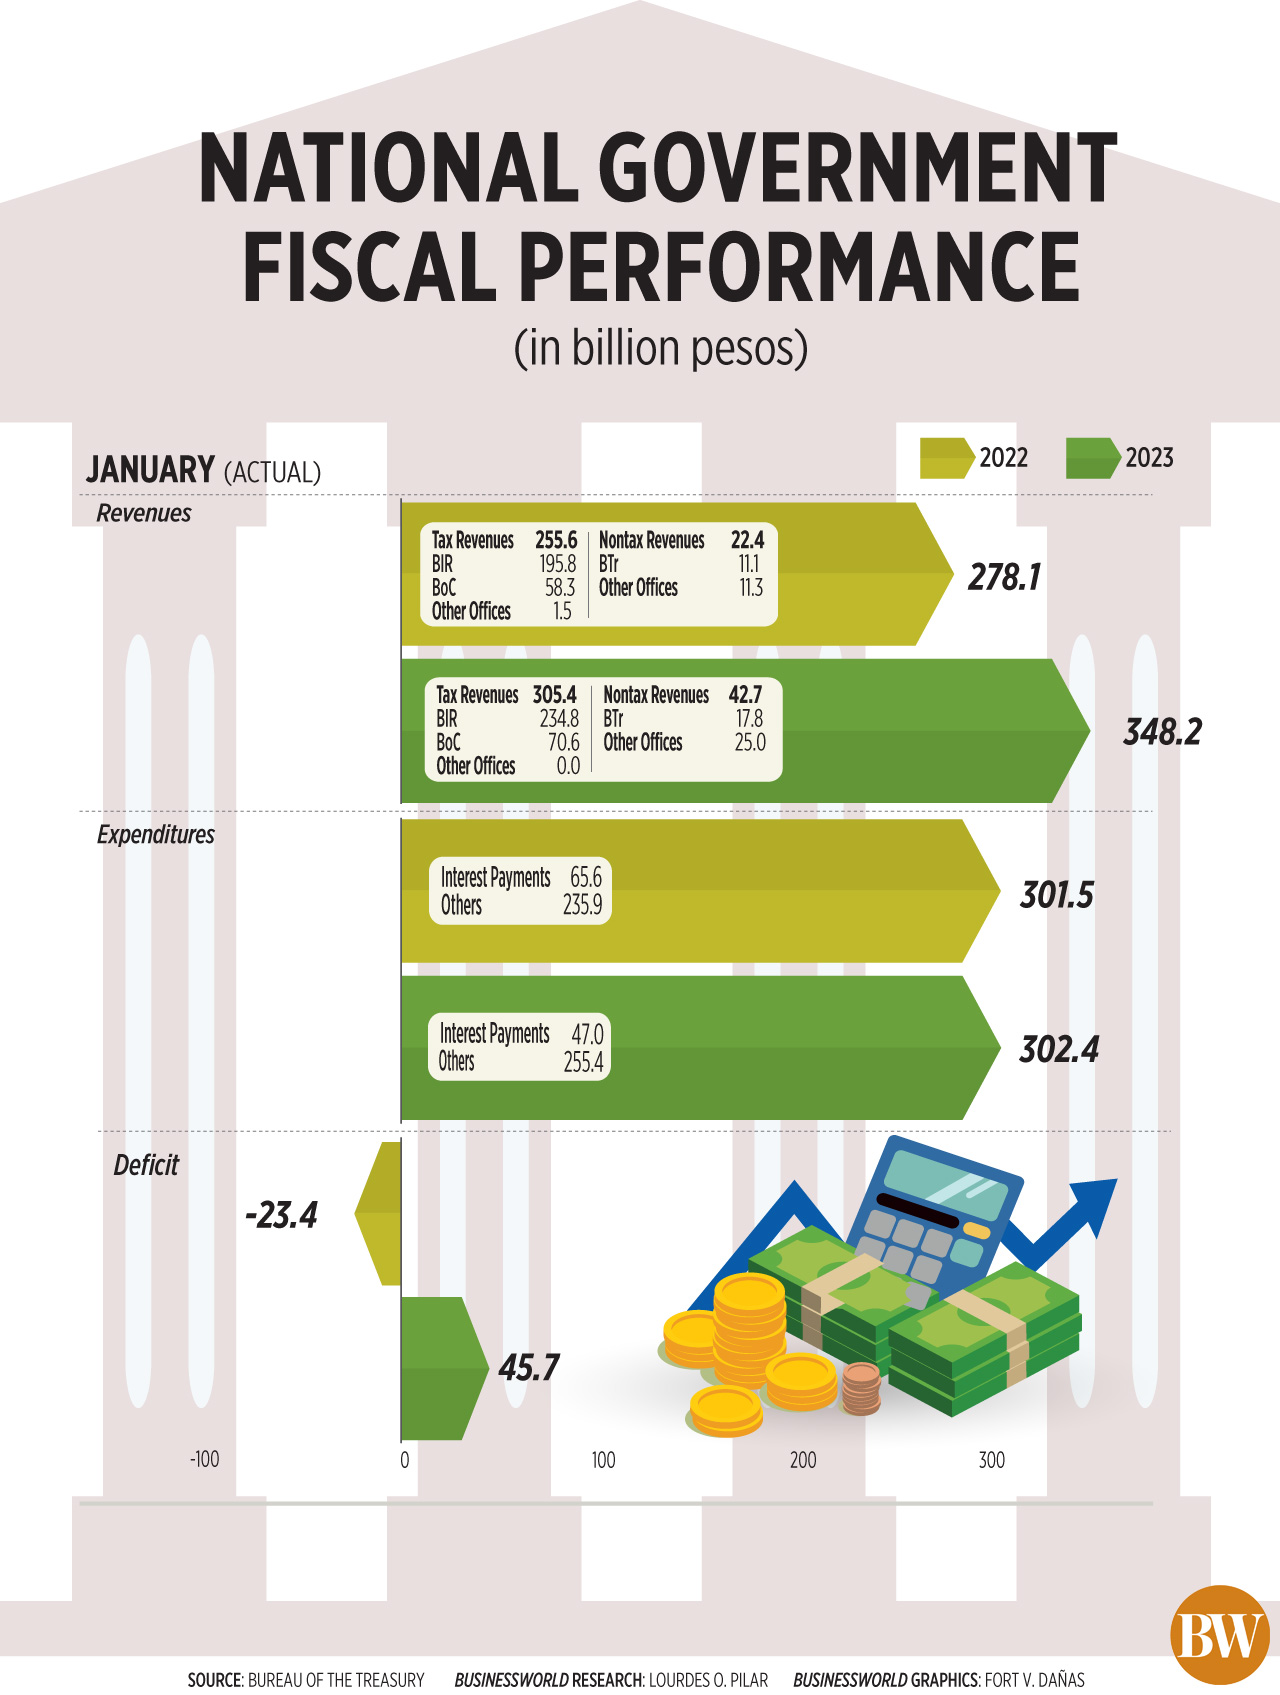 National Government fiscal performance